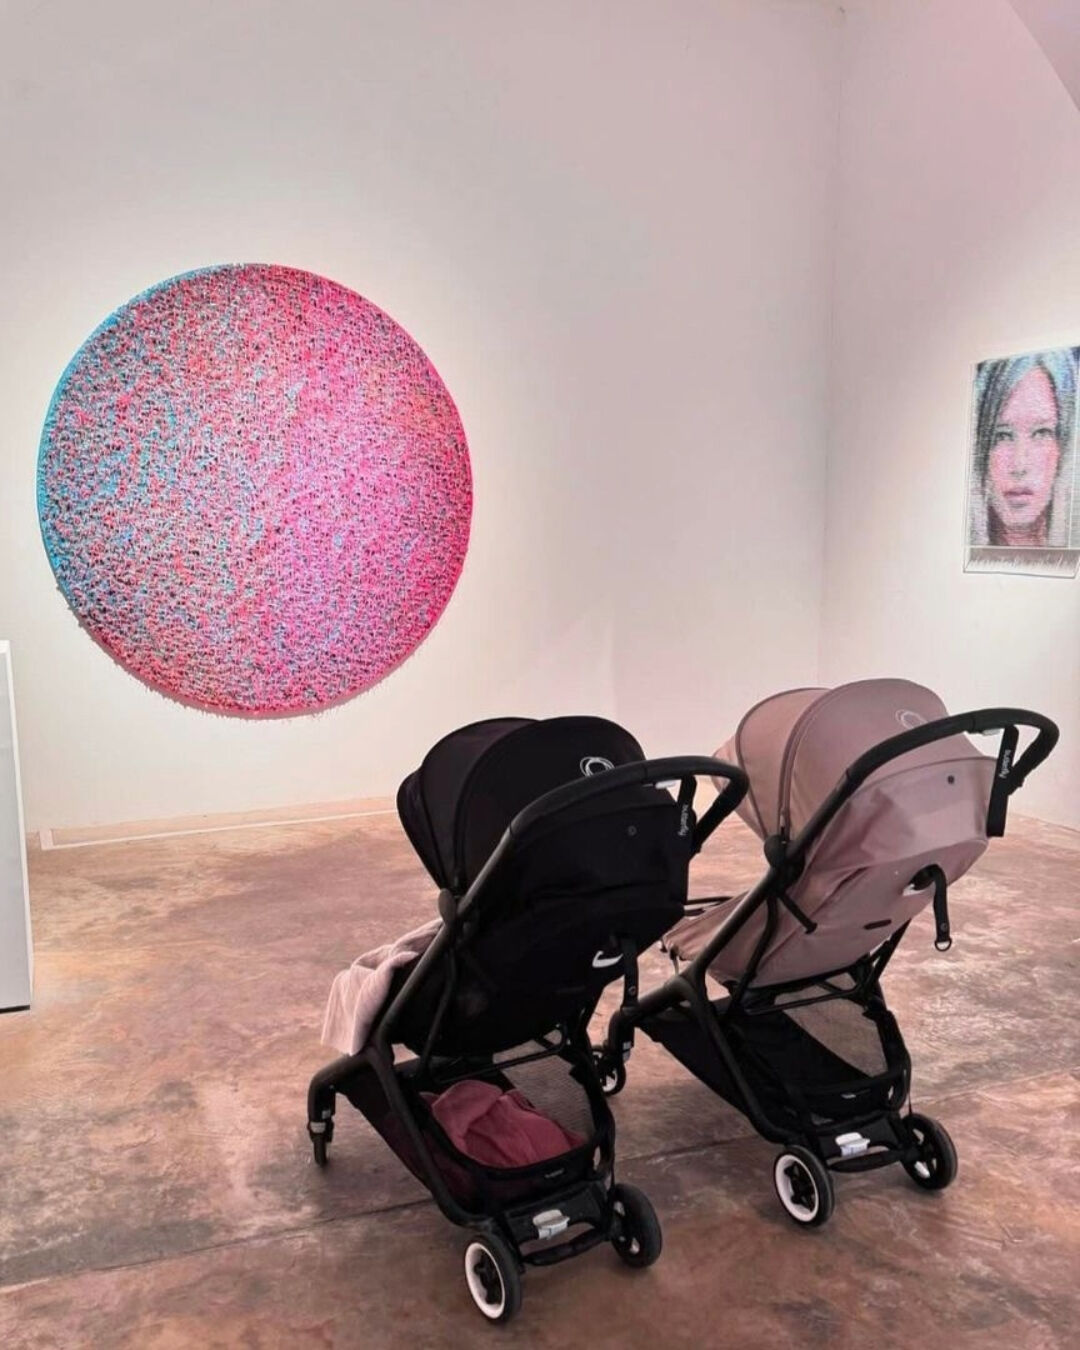 Two Bugaboo Butterfly strollers stand side by side in an art gallery, facing a colorful circular artwork and a sculpture. 